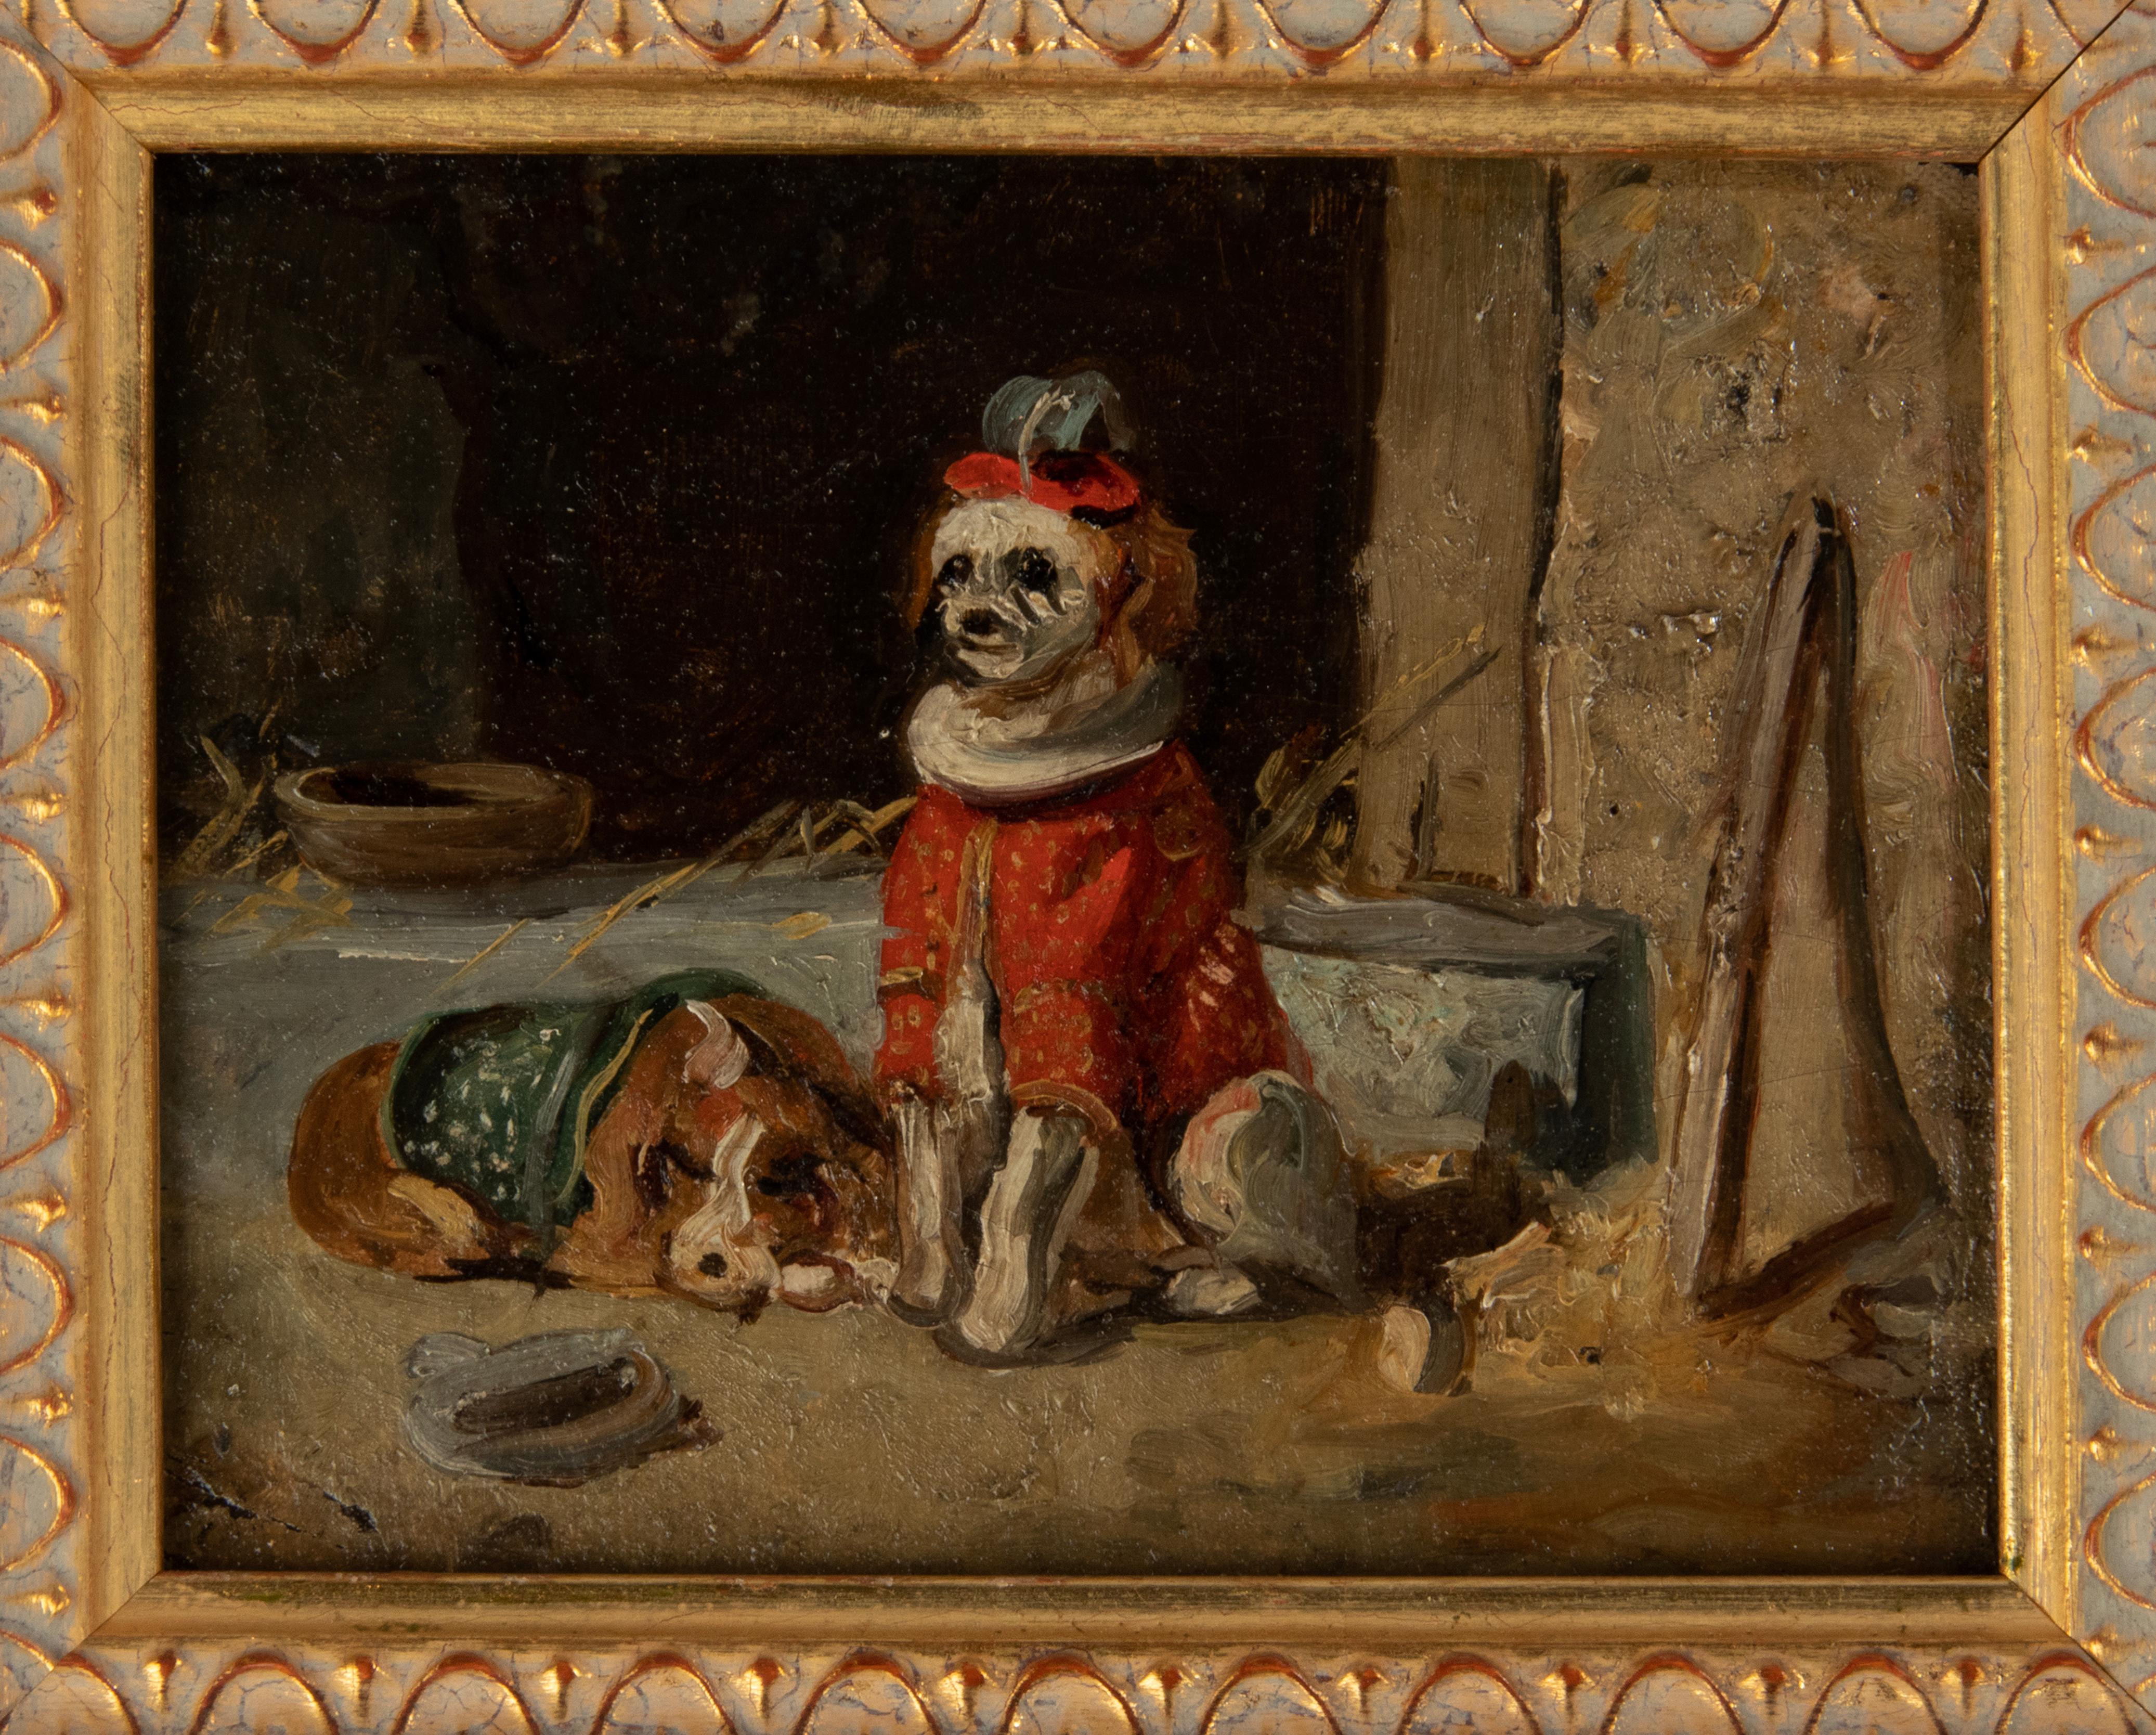 A sweet little painting depicting two dressed up circus dogs. The dogs are painted against a sober background.
The painting is oil on panel and dates from circa 1900. Presumably of Belgian or French origin. The painting is not signed. The frame is